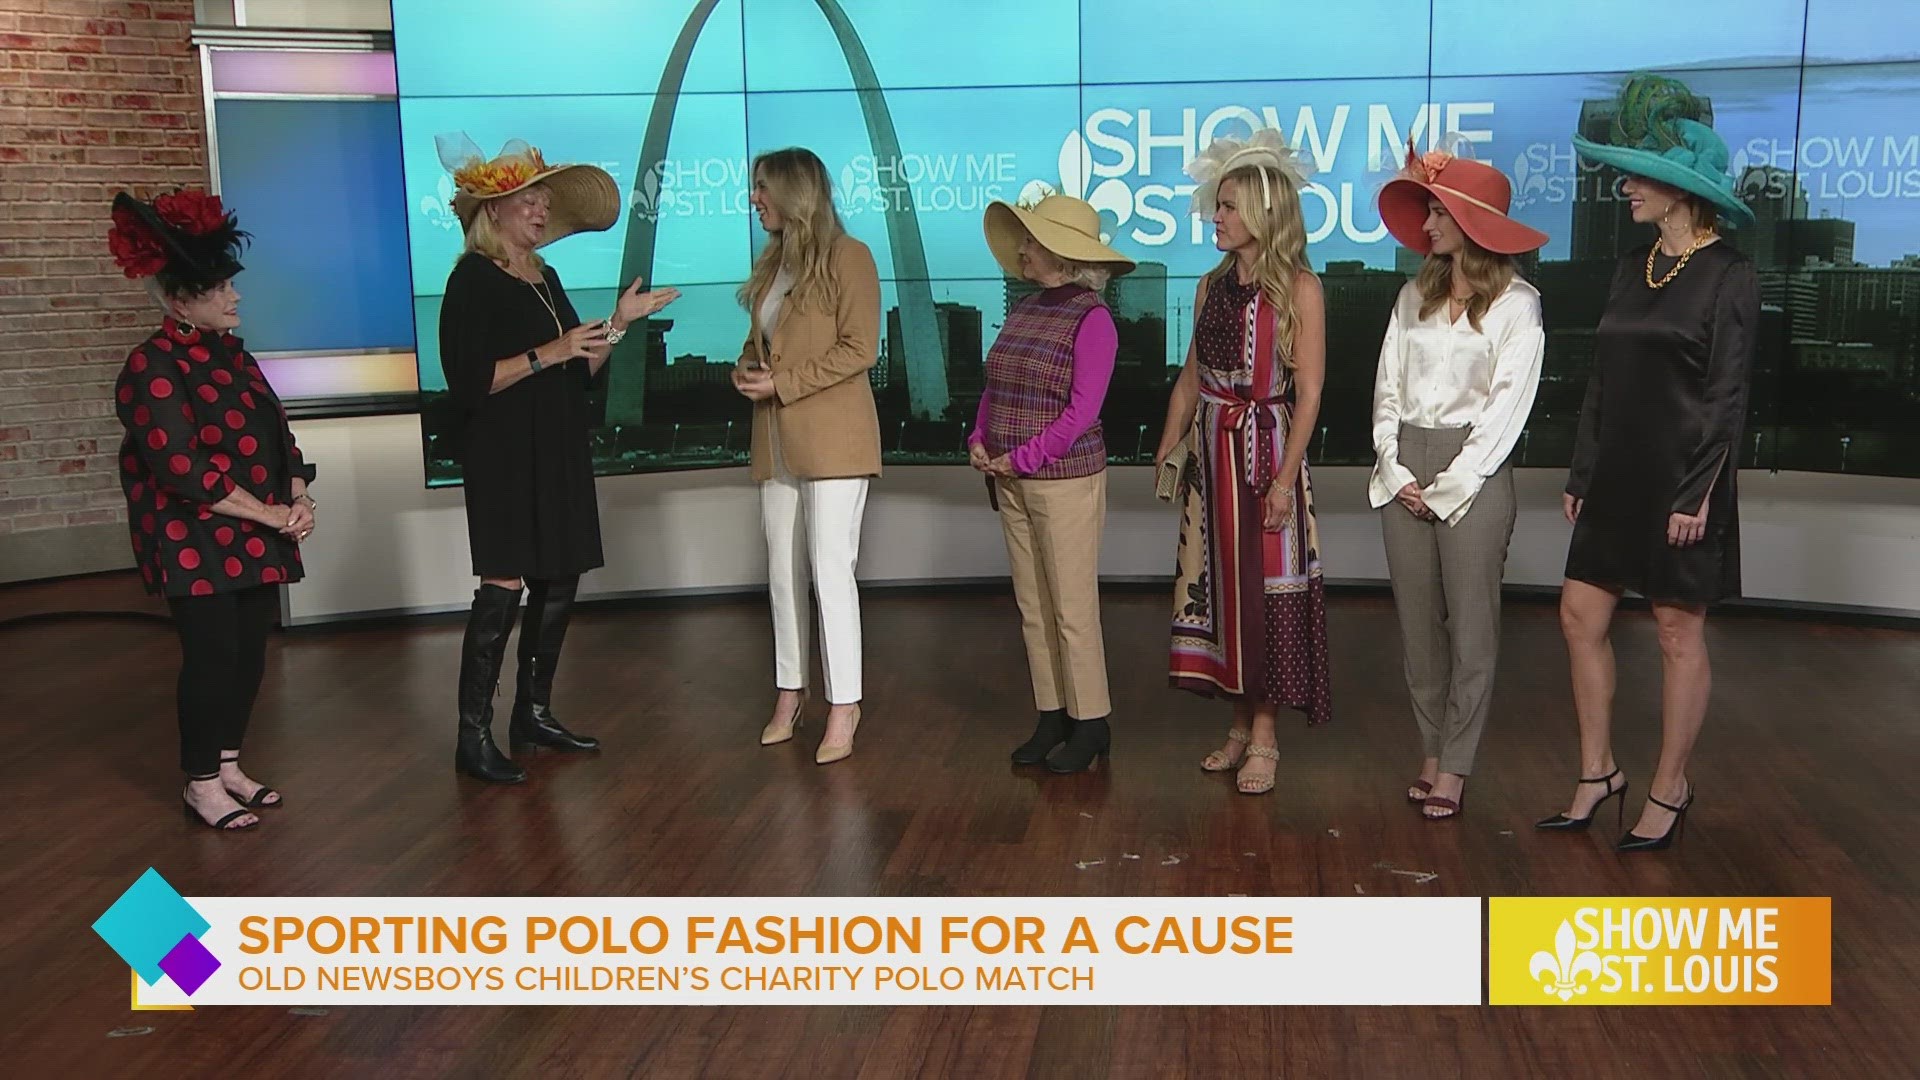 Sporting polo fashion for a cause